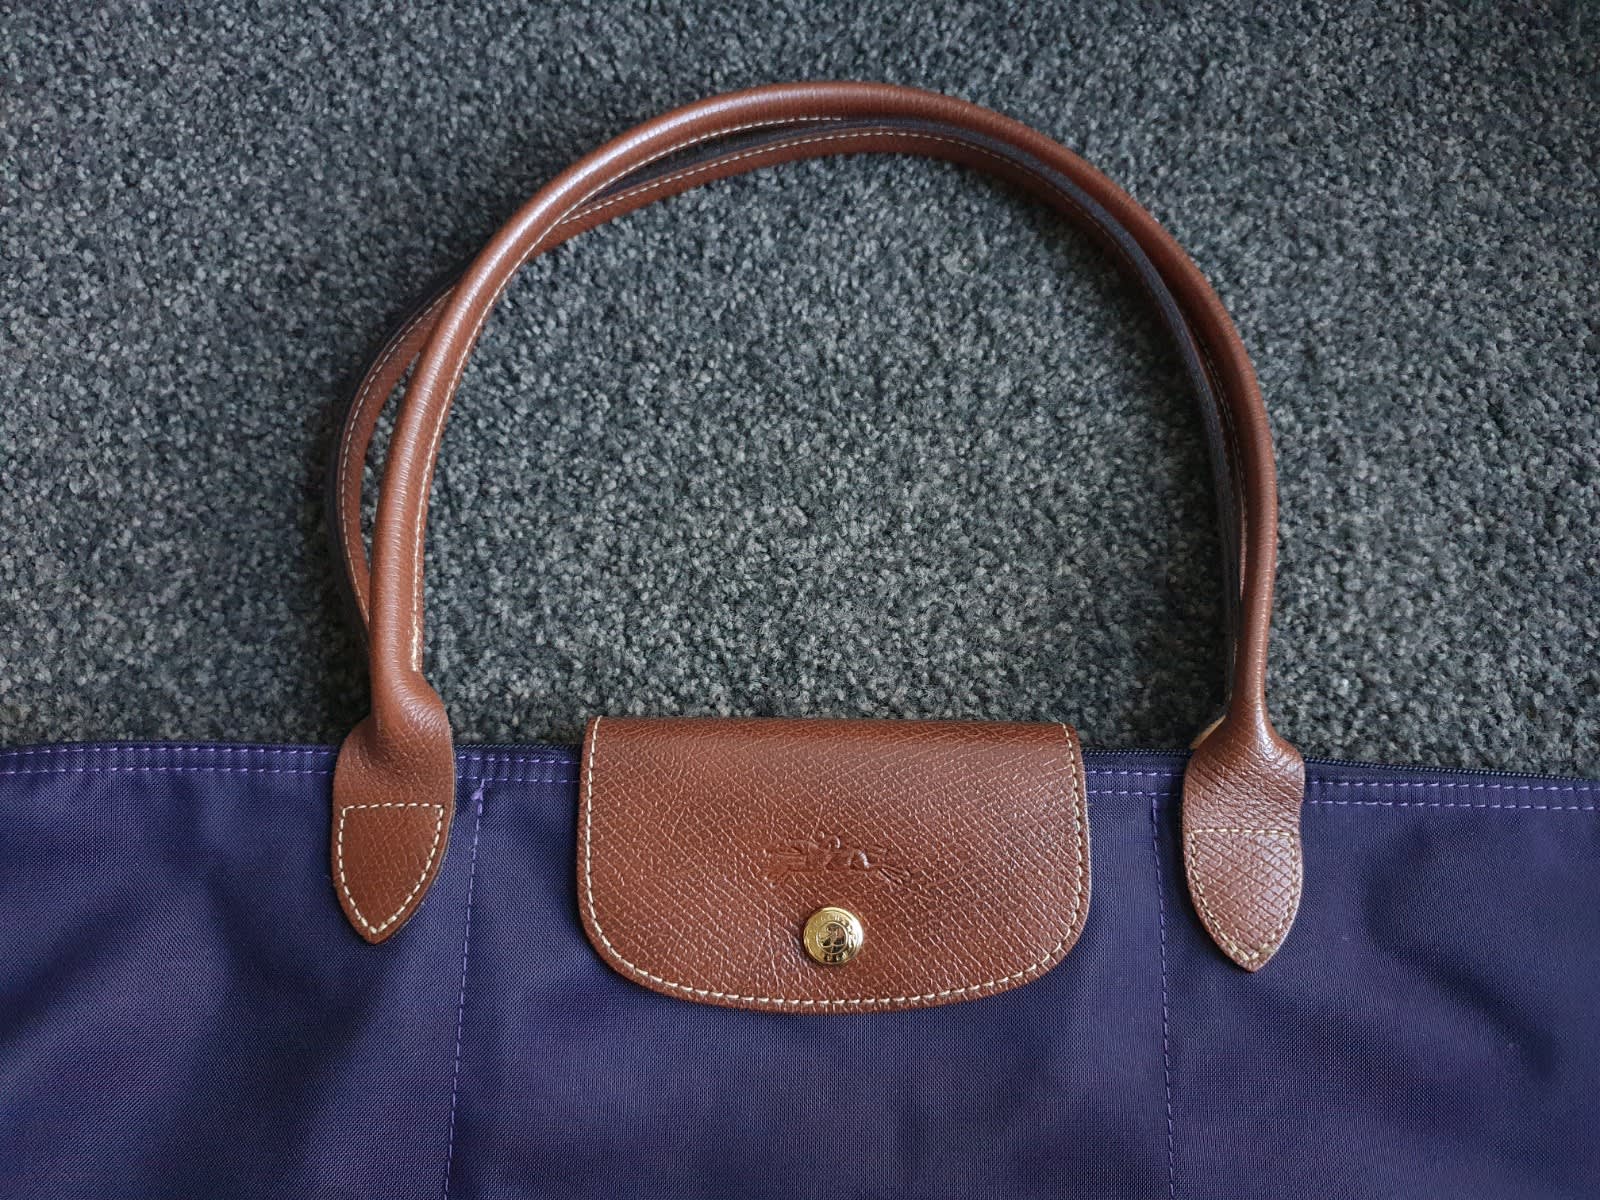 LONGCHAMP LE PLIAGE Neo Bag - Small Size - Navy and Black - Brand New  $148.00 - PicClick AU